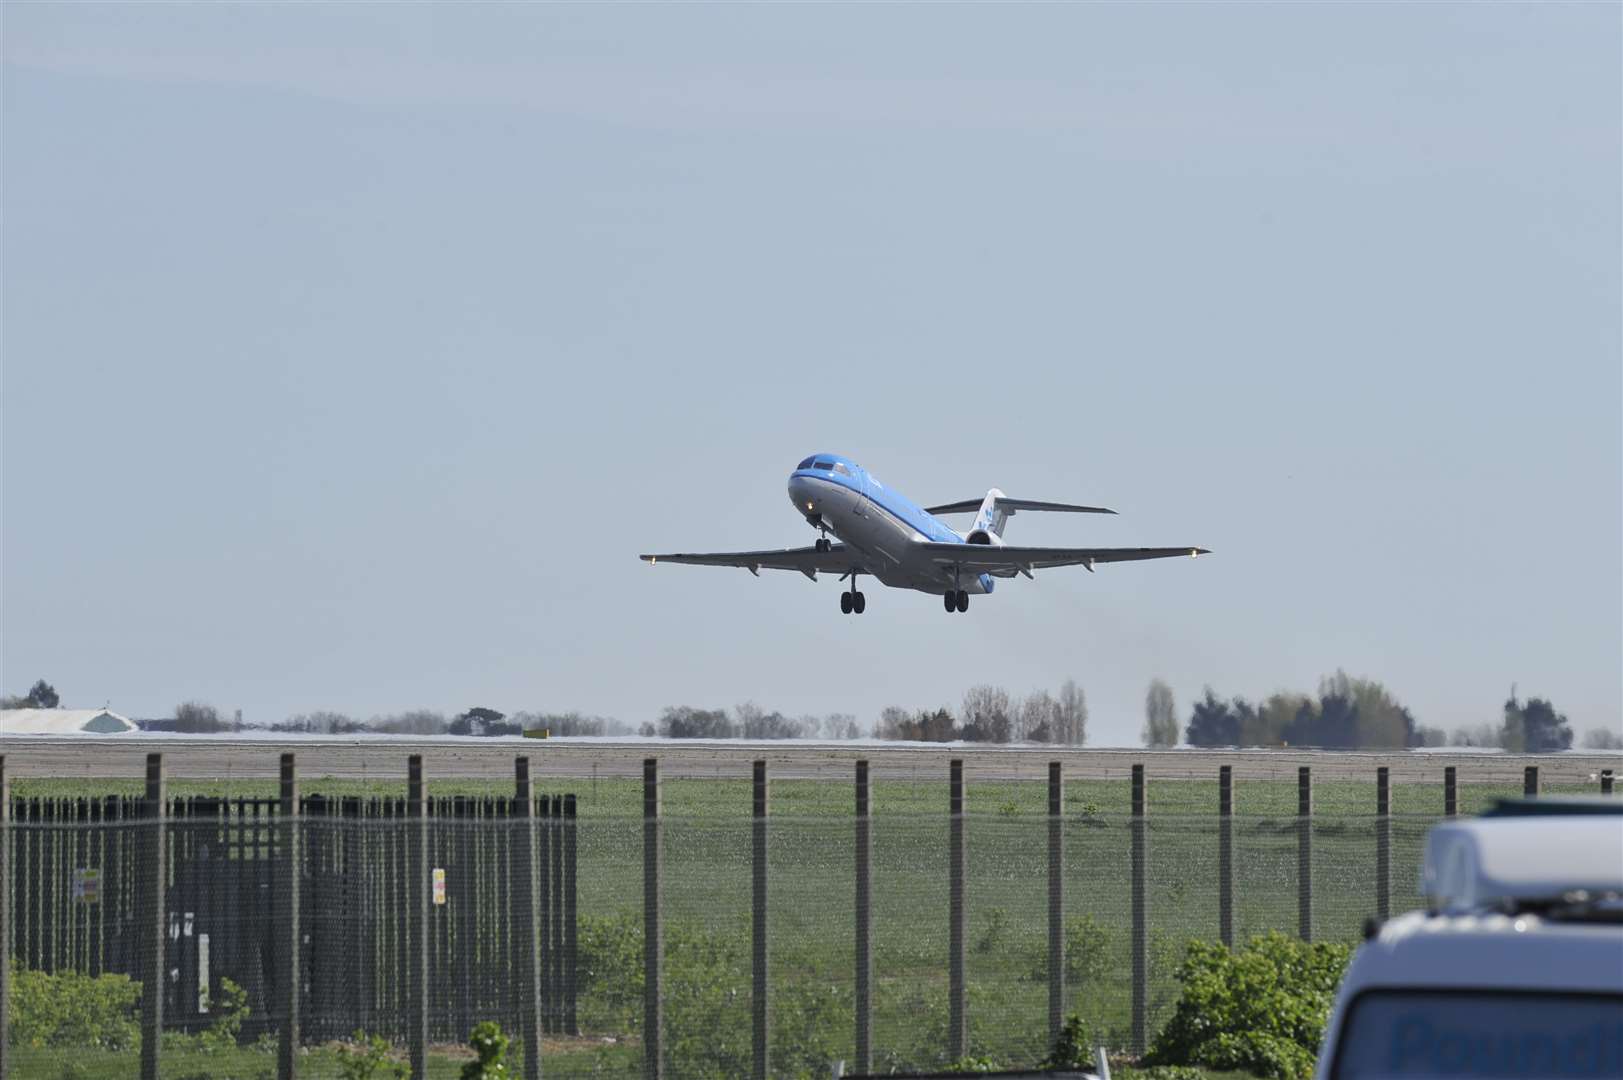 The last flight took off from Manston in April 2014